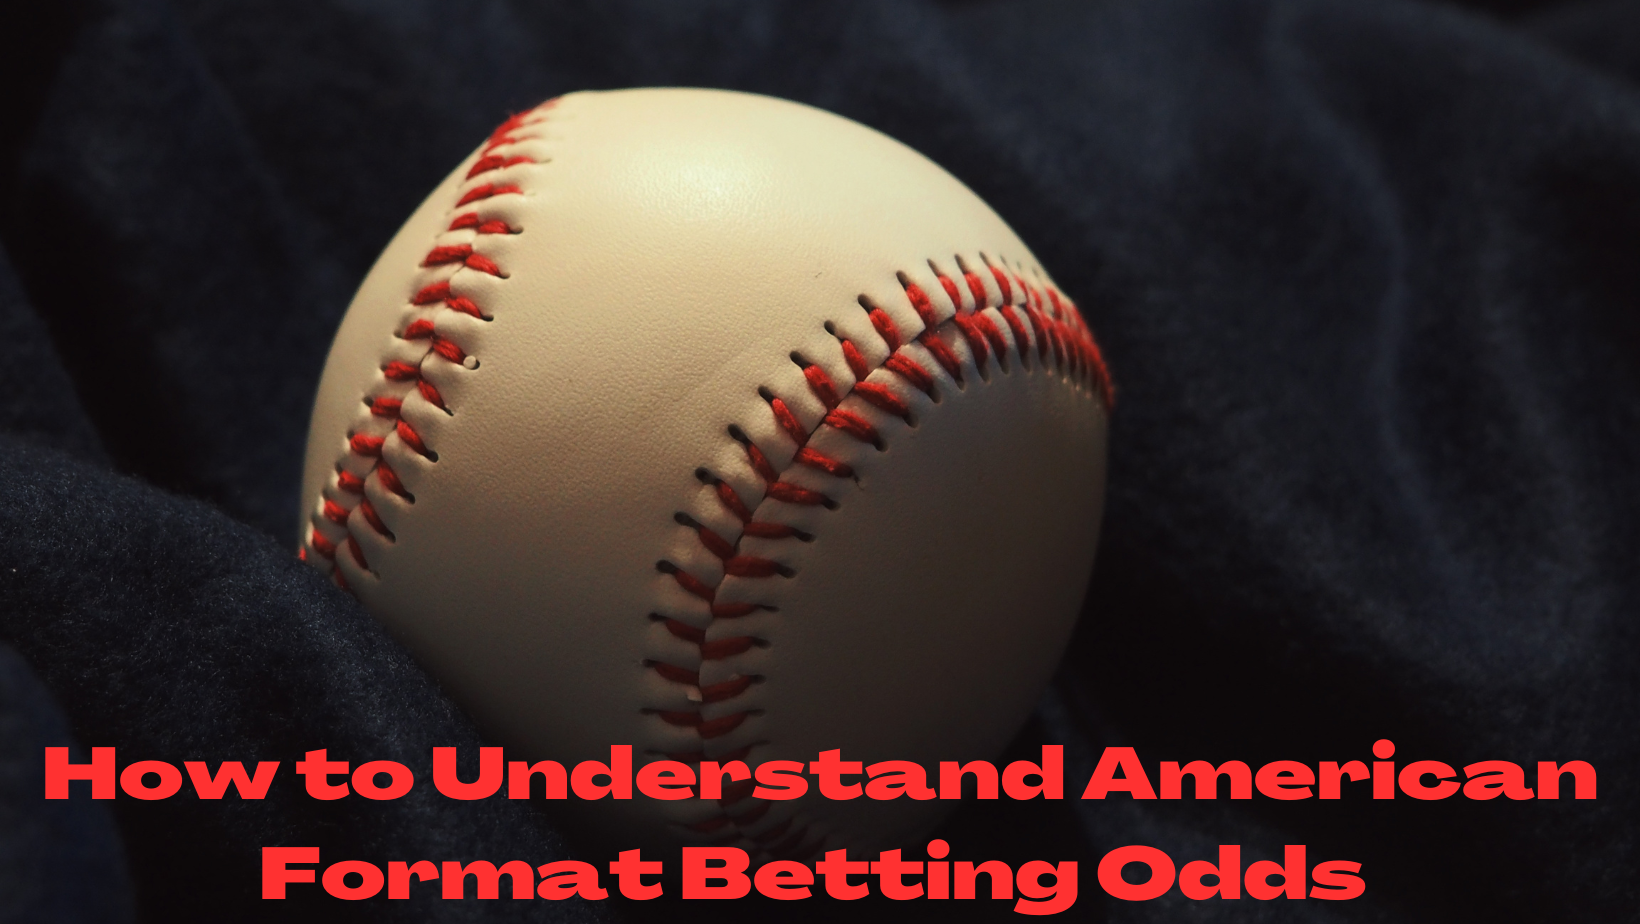 Title page for the article that says "How to understand American format betting odds"